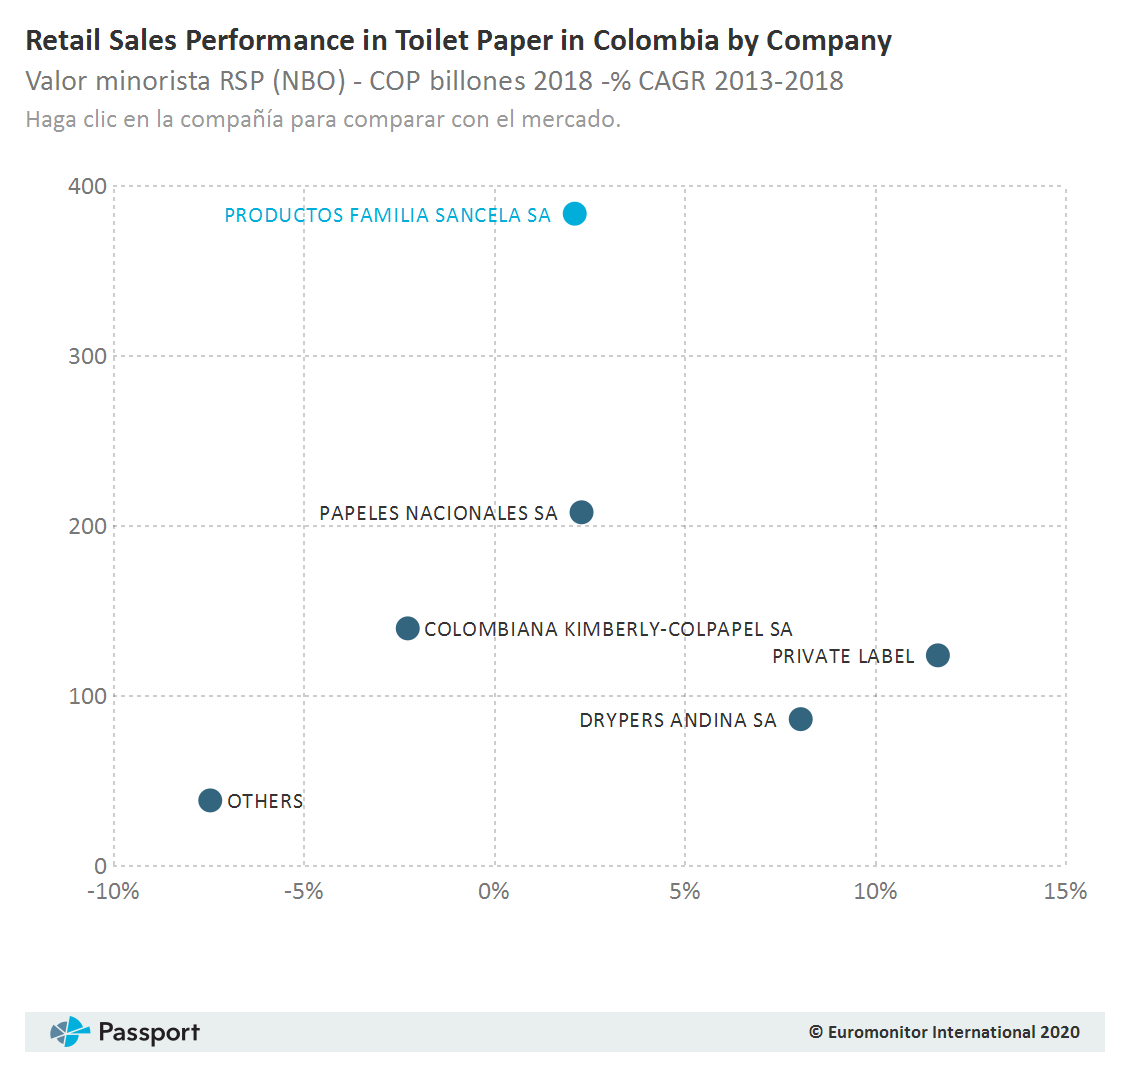 Retail_Sales_Performance_in_Toilet_Paper_in_Colombia_by_Company